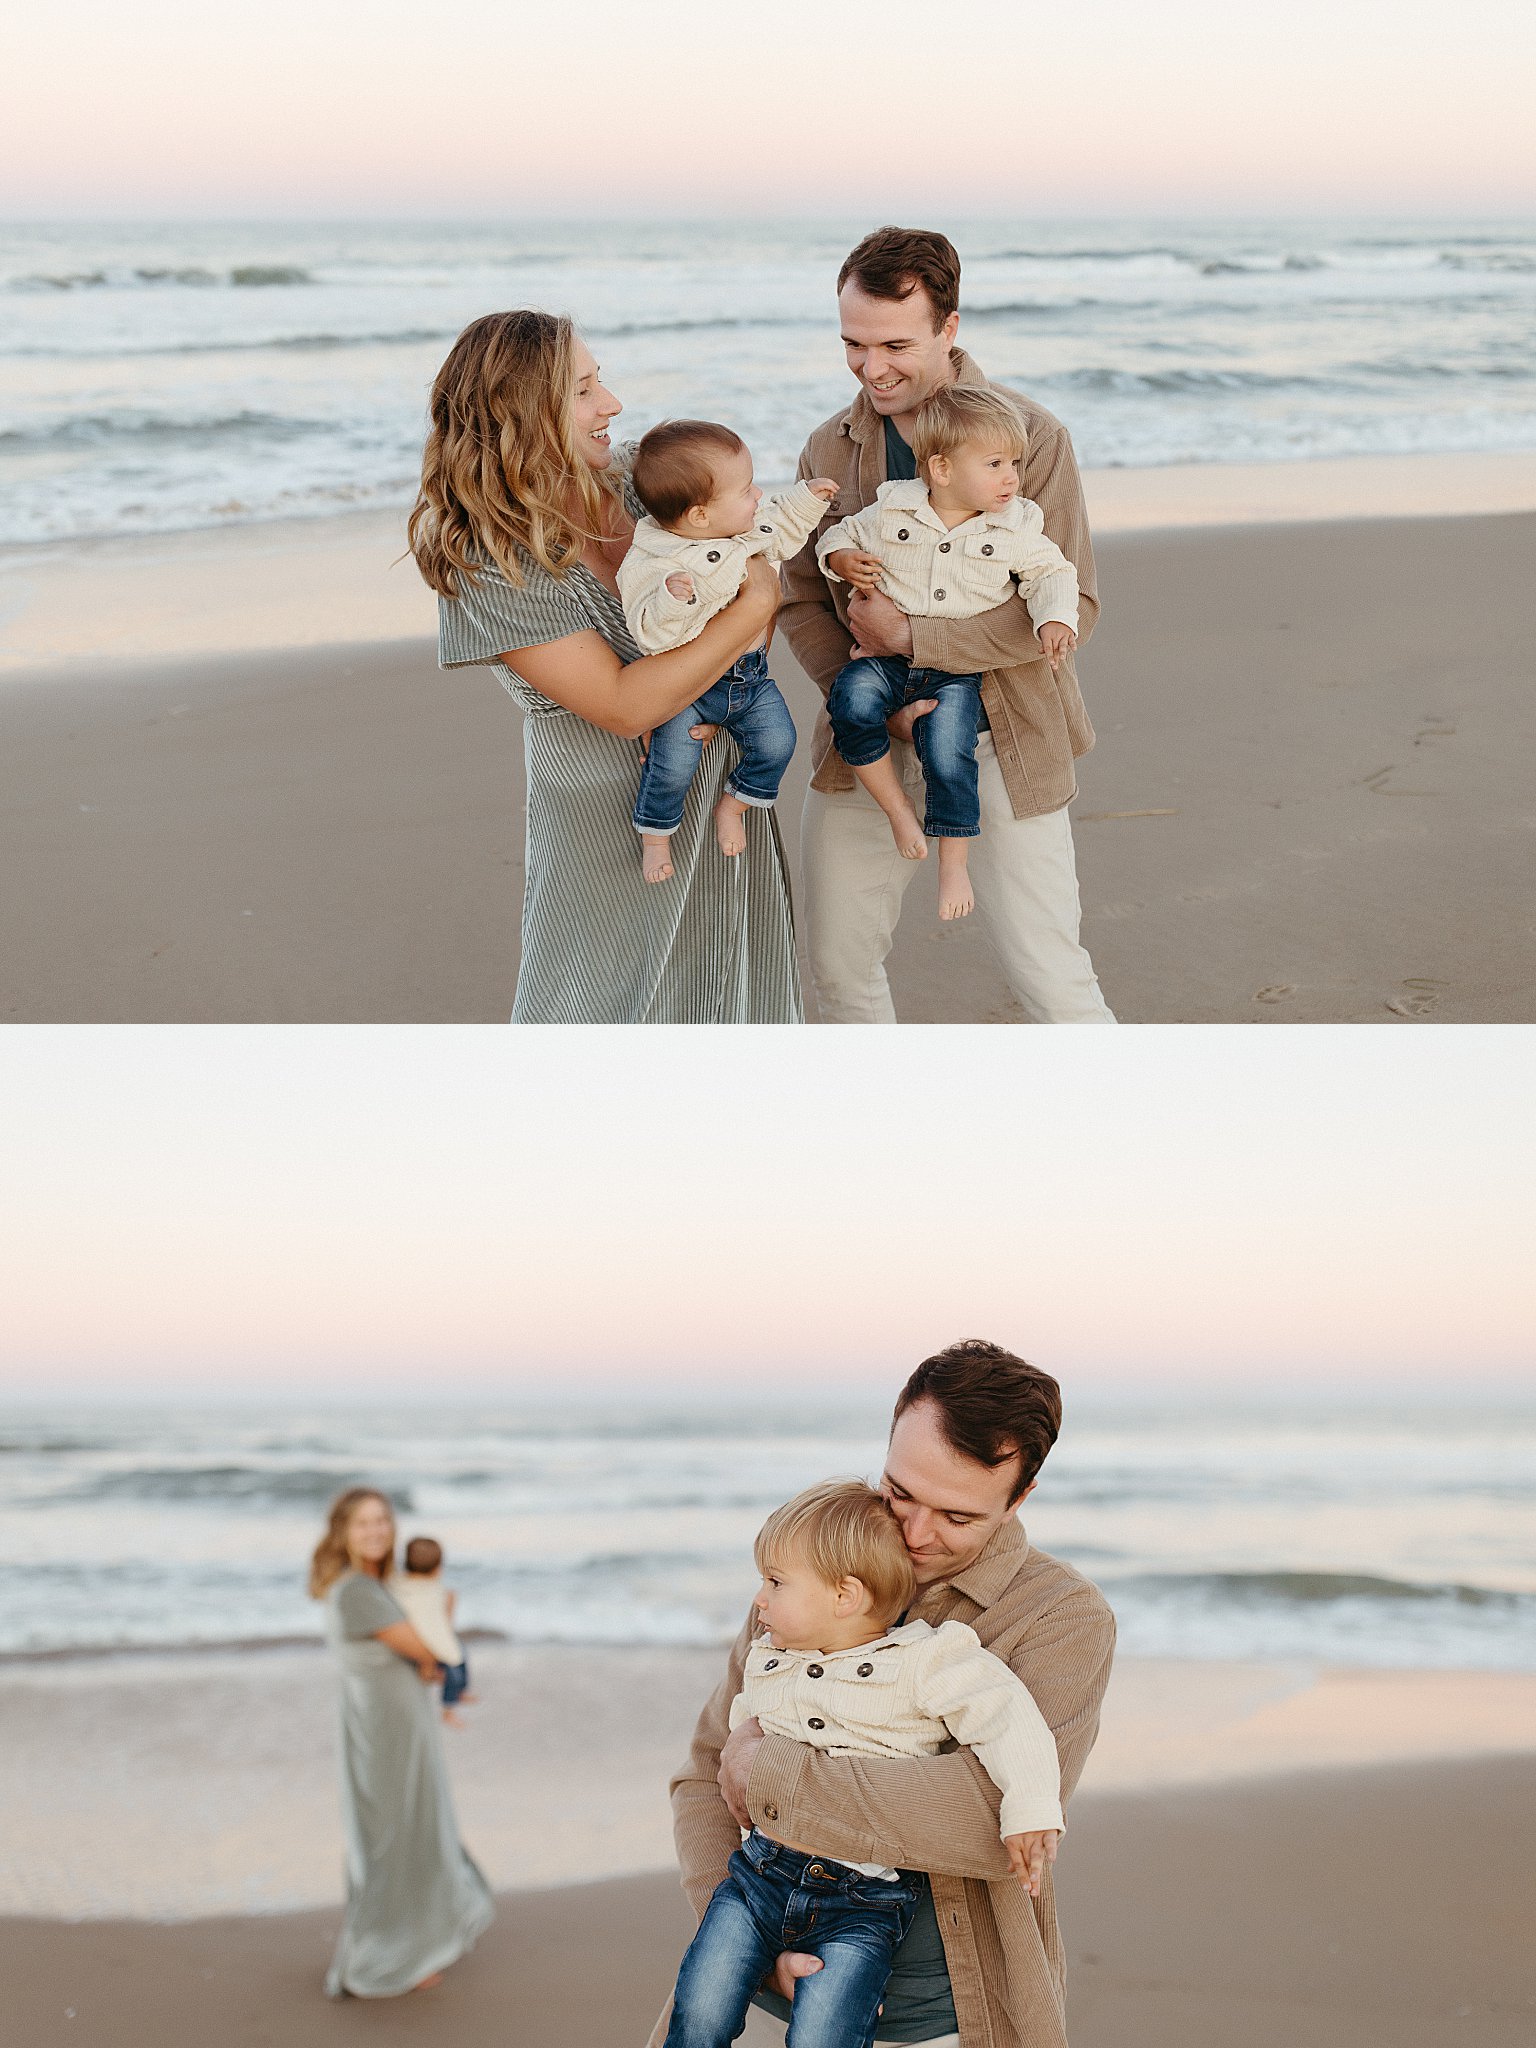 family coordinates with neutral color outfit selection on the beach